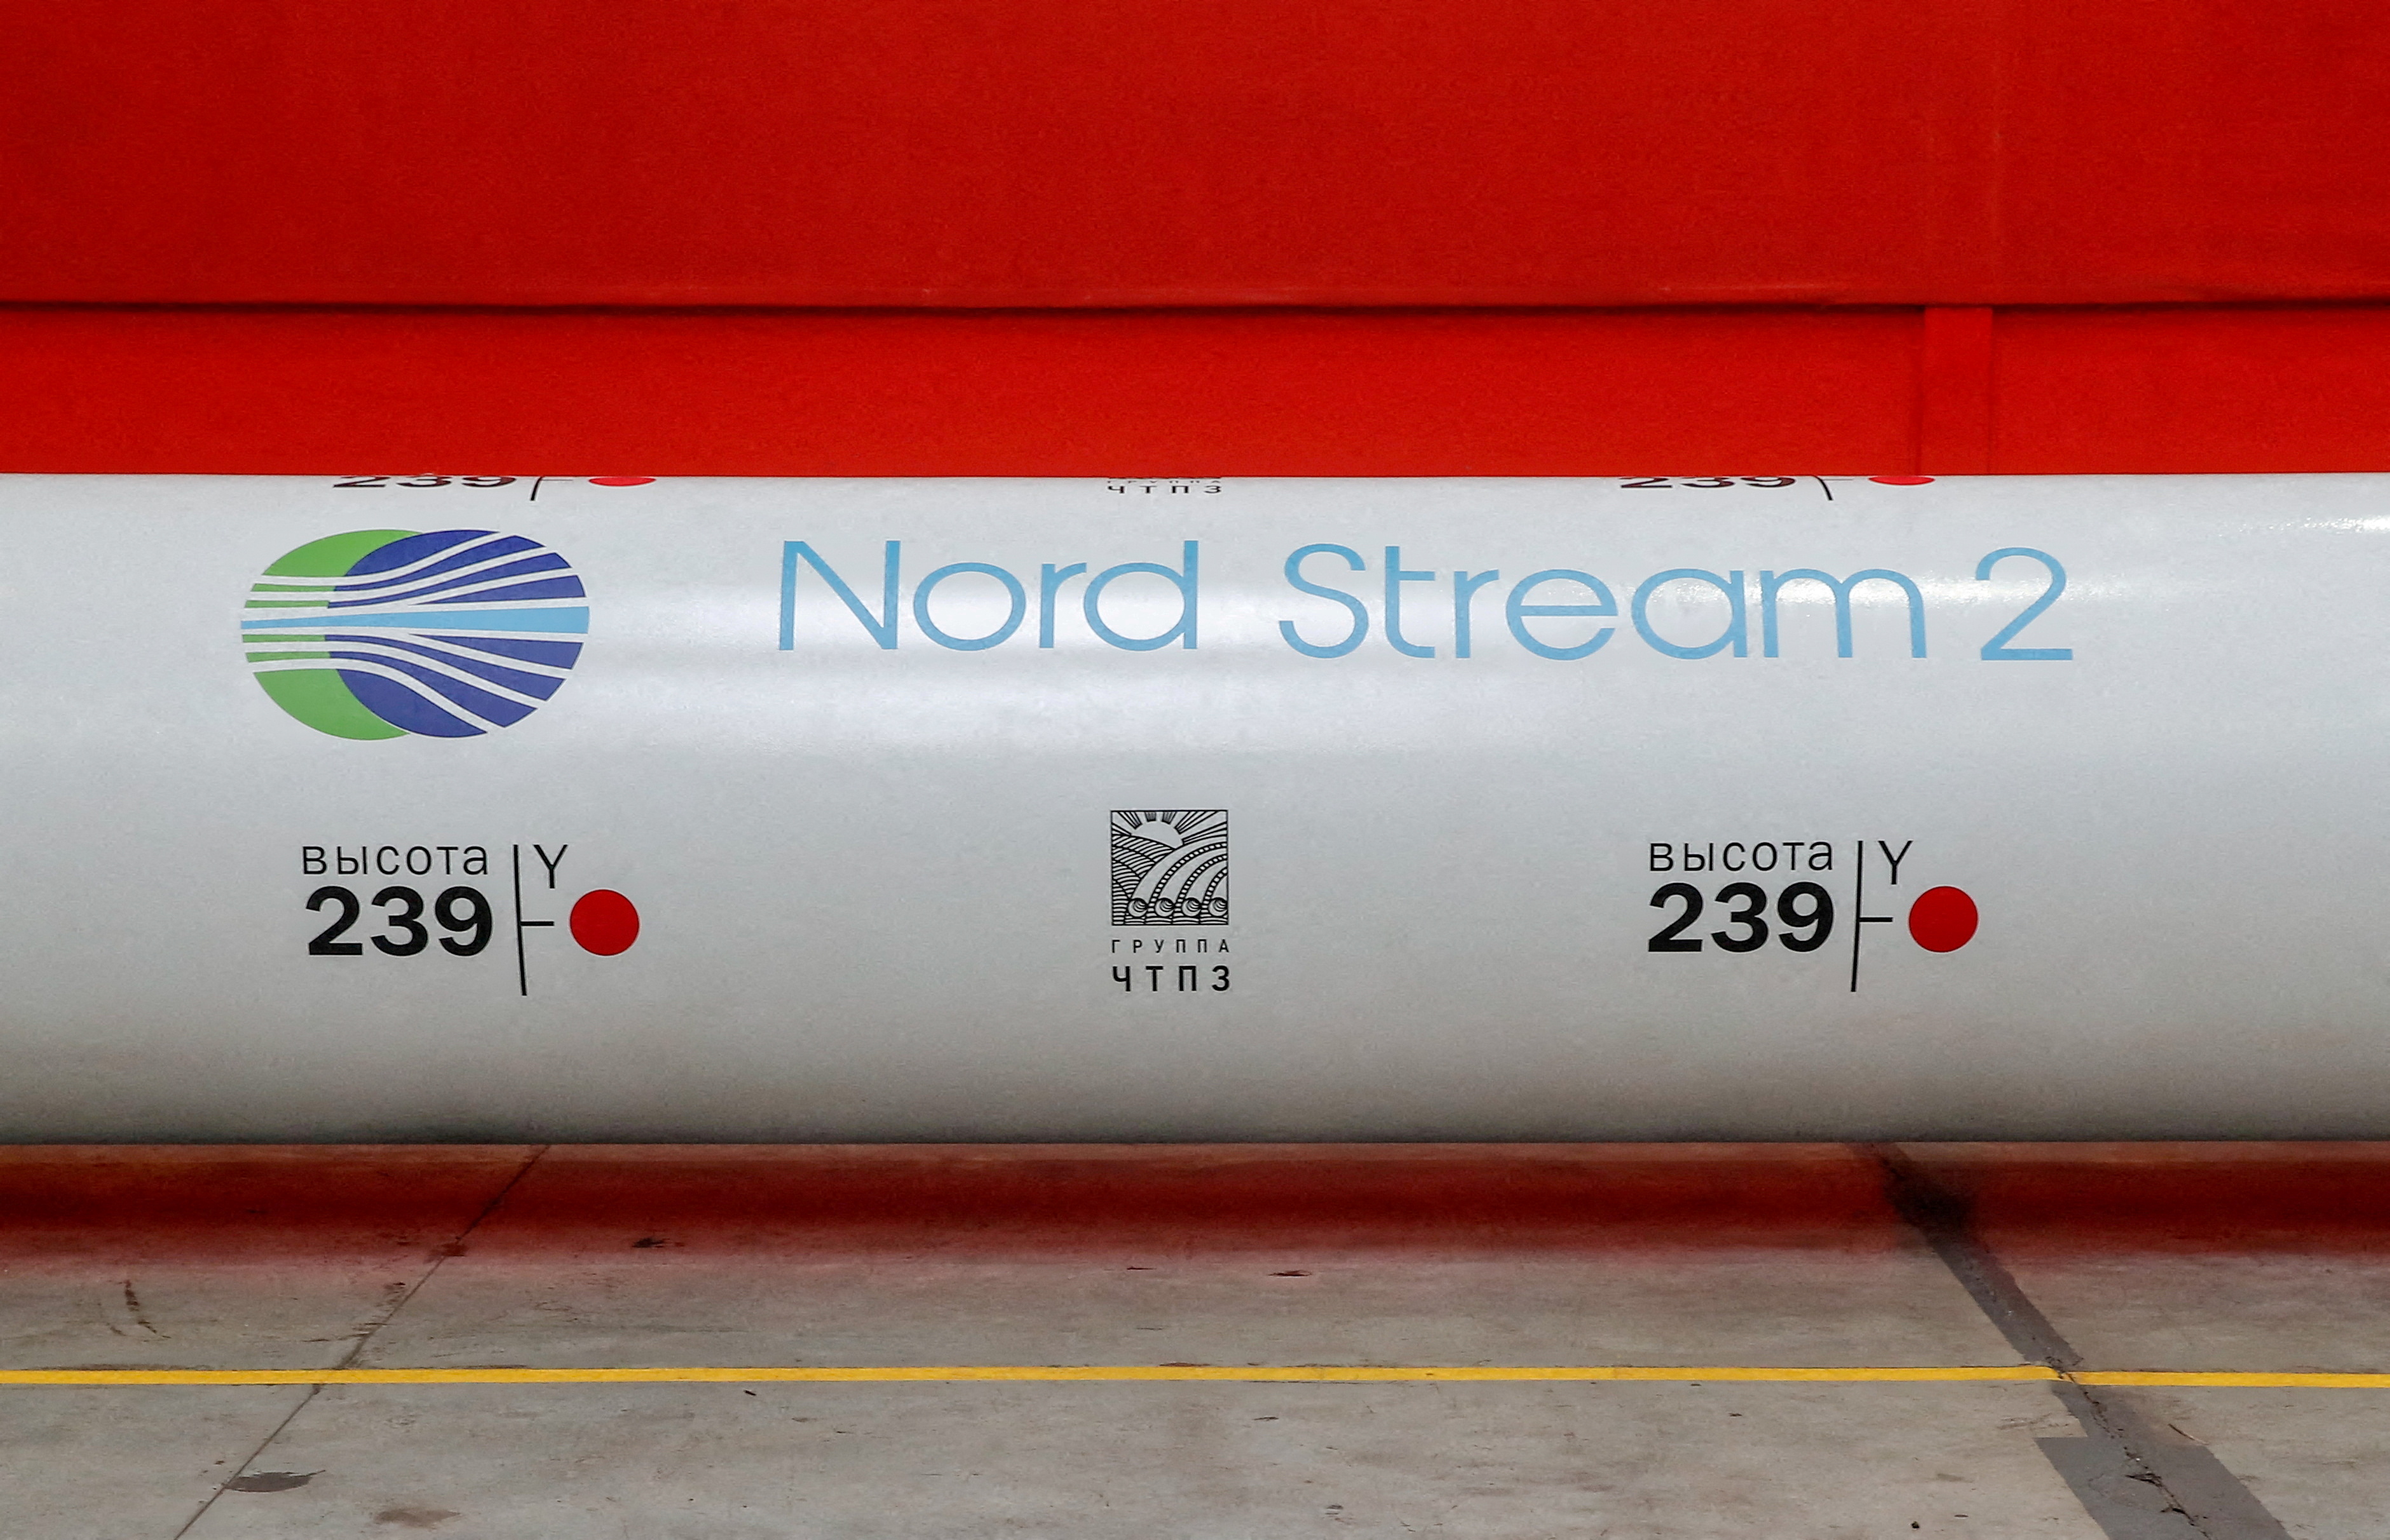 The logo of the Nord Stream 2 gas pipeline project is seen on a large diameter pipe at the Chelyabinsk Pipe Rolling Plant owned by ChelPipe Group in Chelyabinsk, Russia, February 26, 2020. REUTERS/Maxim Shemetov